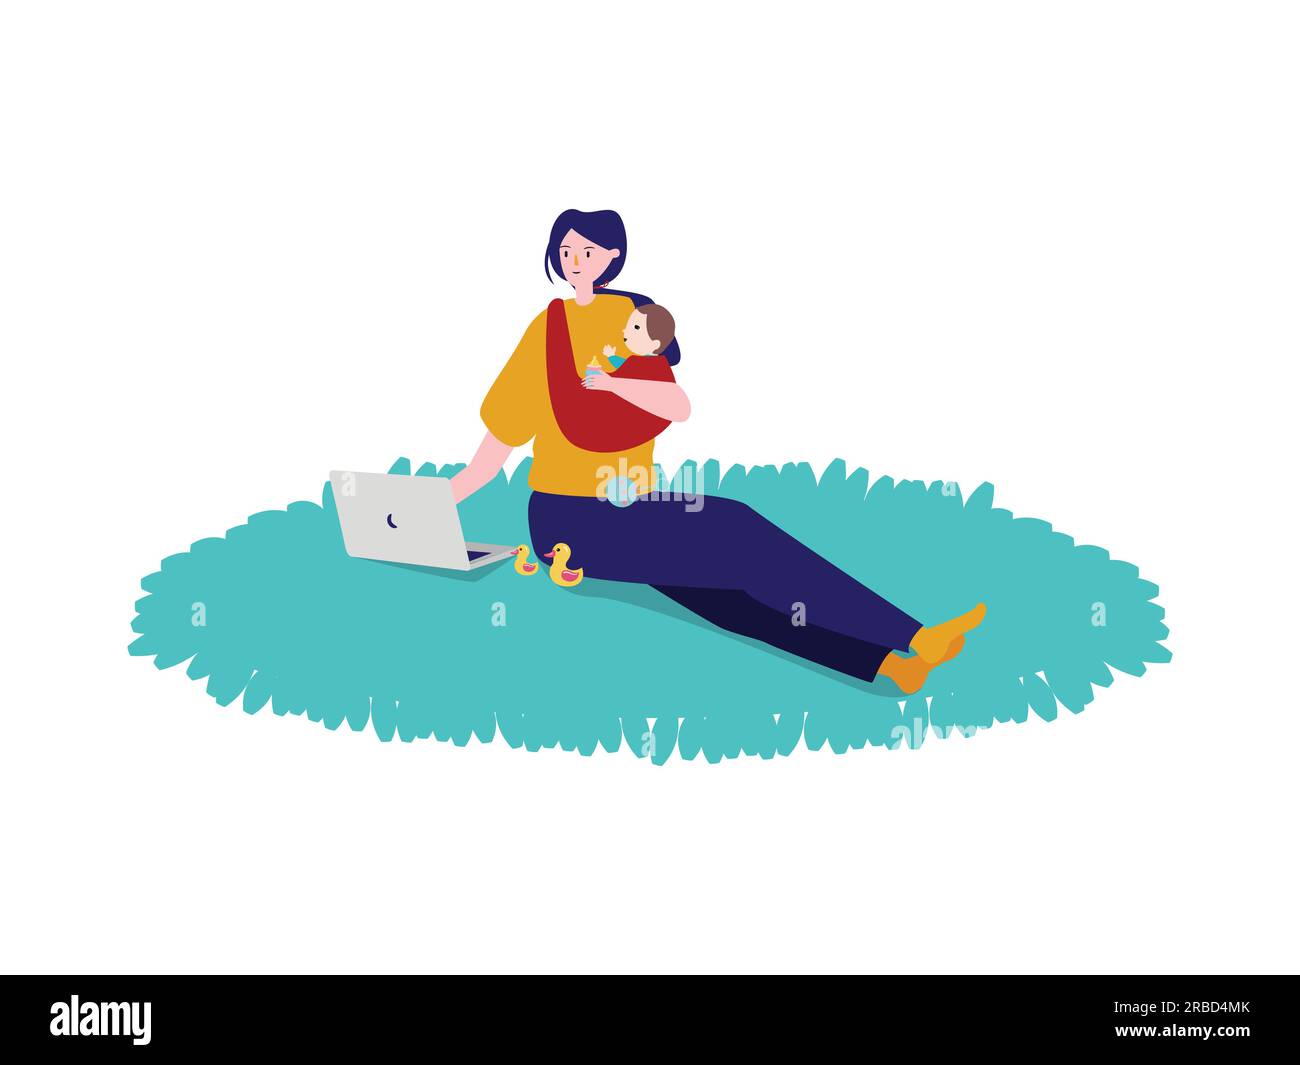 Mother work from home wireless communication distance job with take care little baby sweet cute adorable Stock Vector